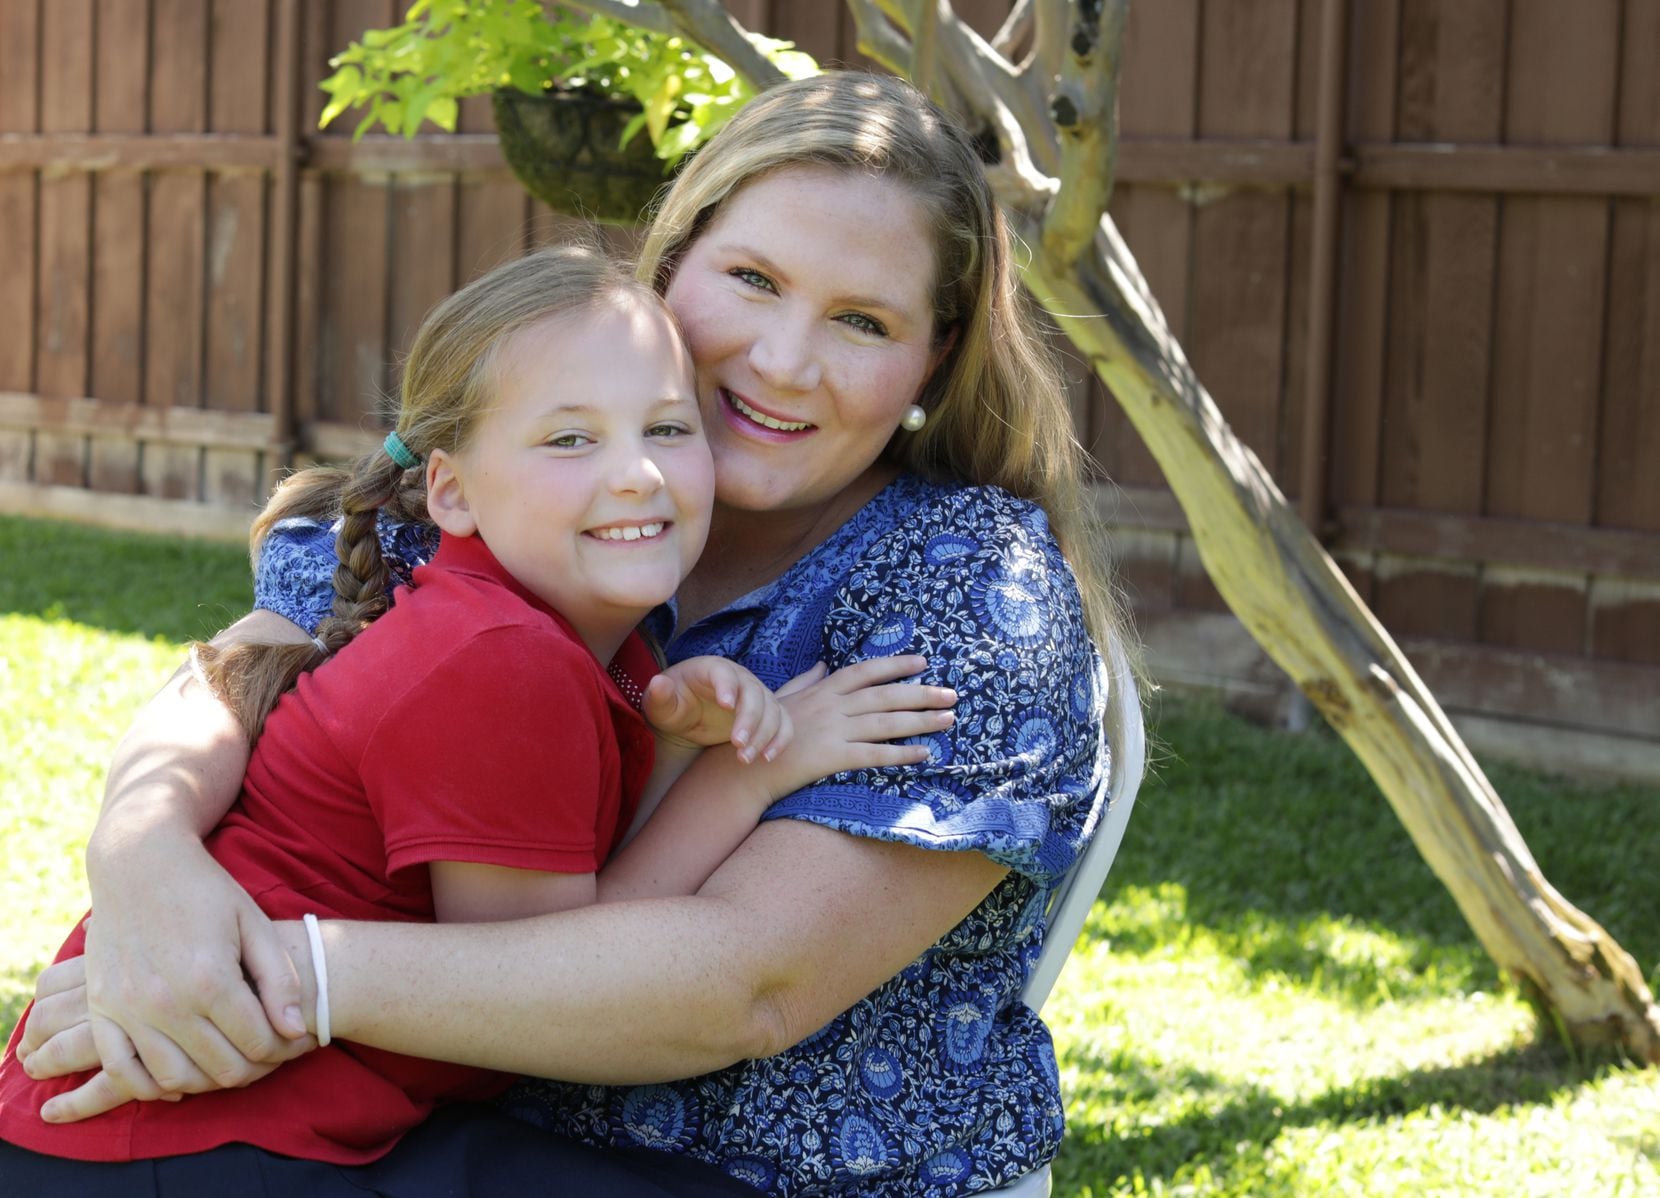 7-year-old Hattie Decker, left, and her mother Cassie Evans at their home in Dallas on May...